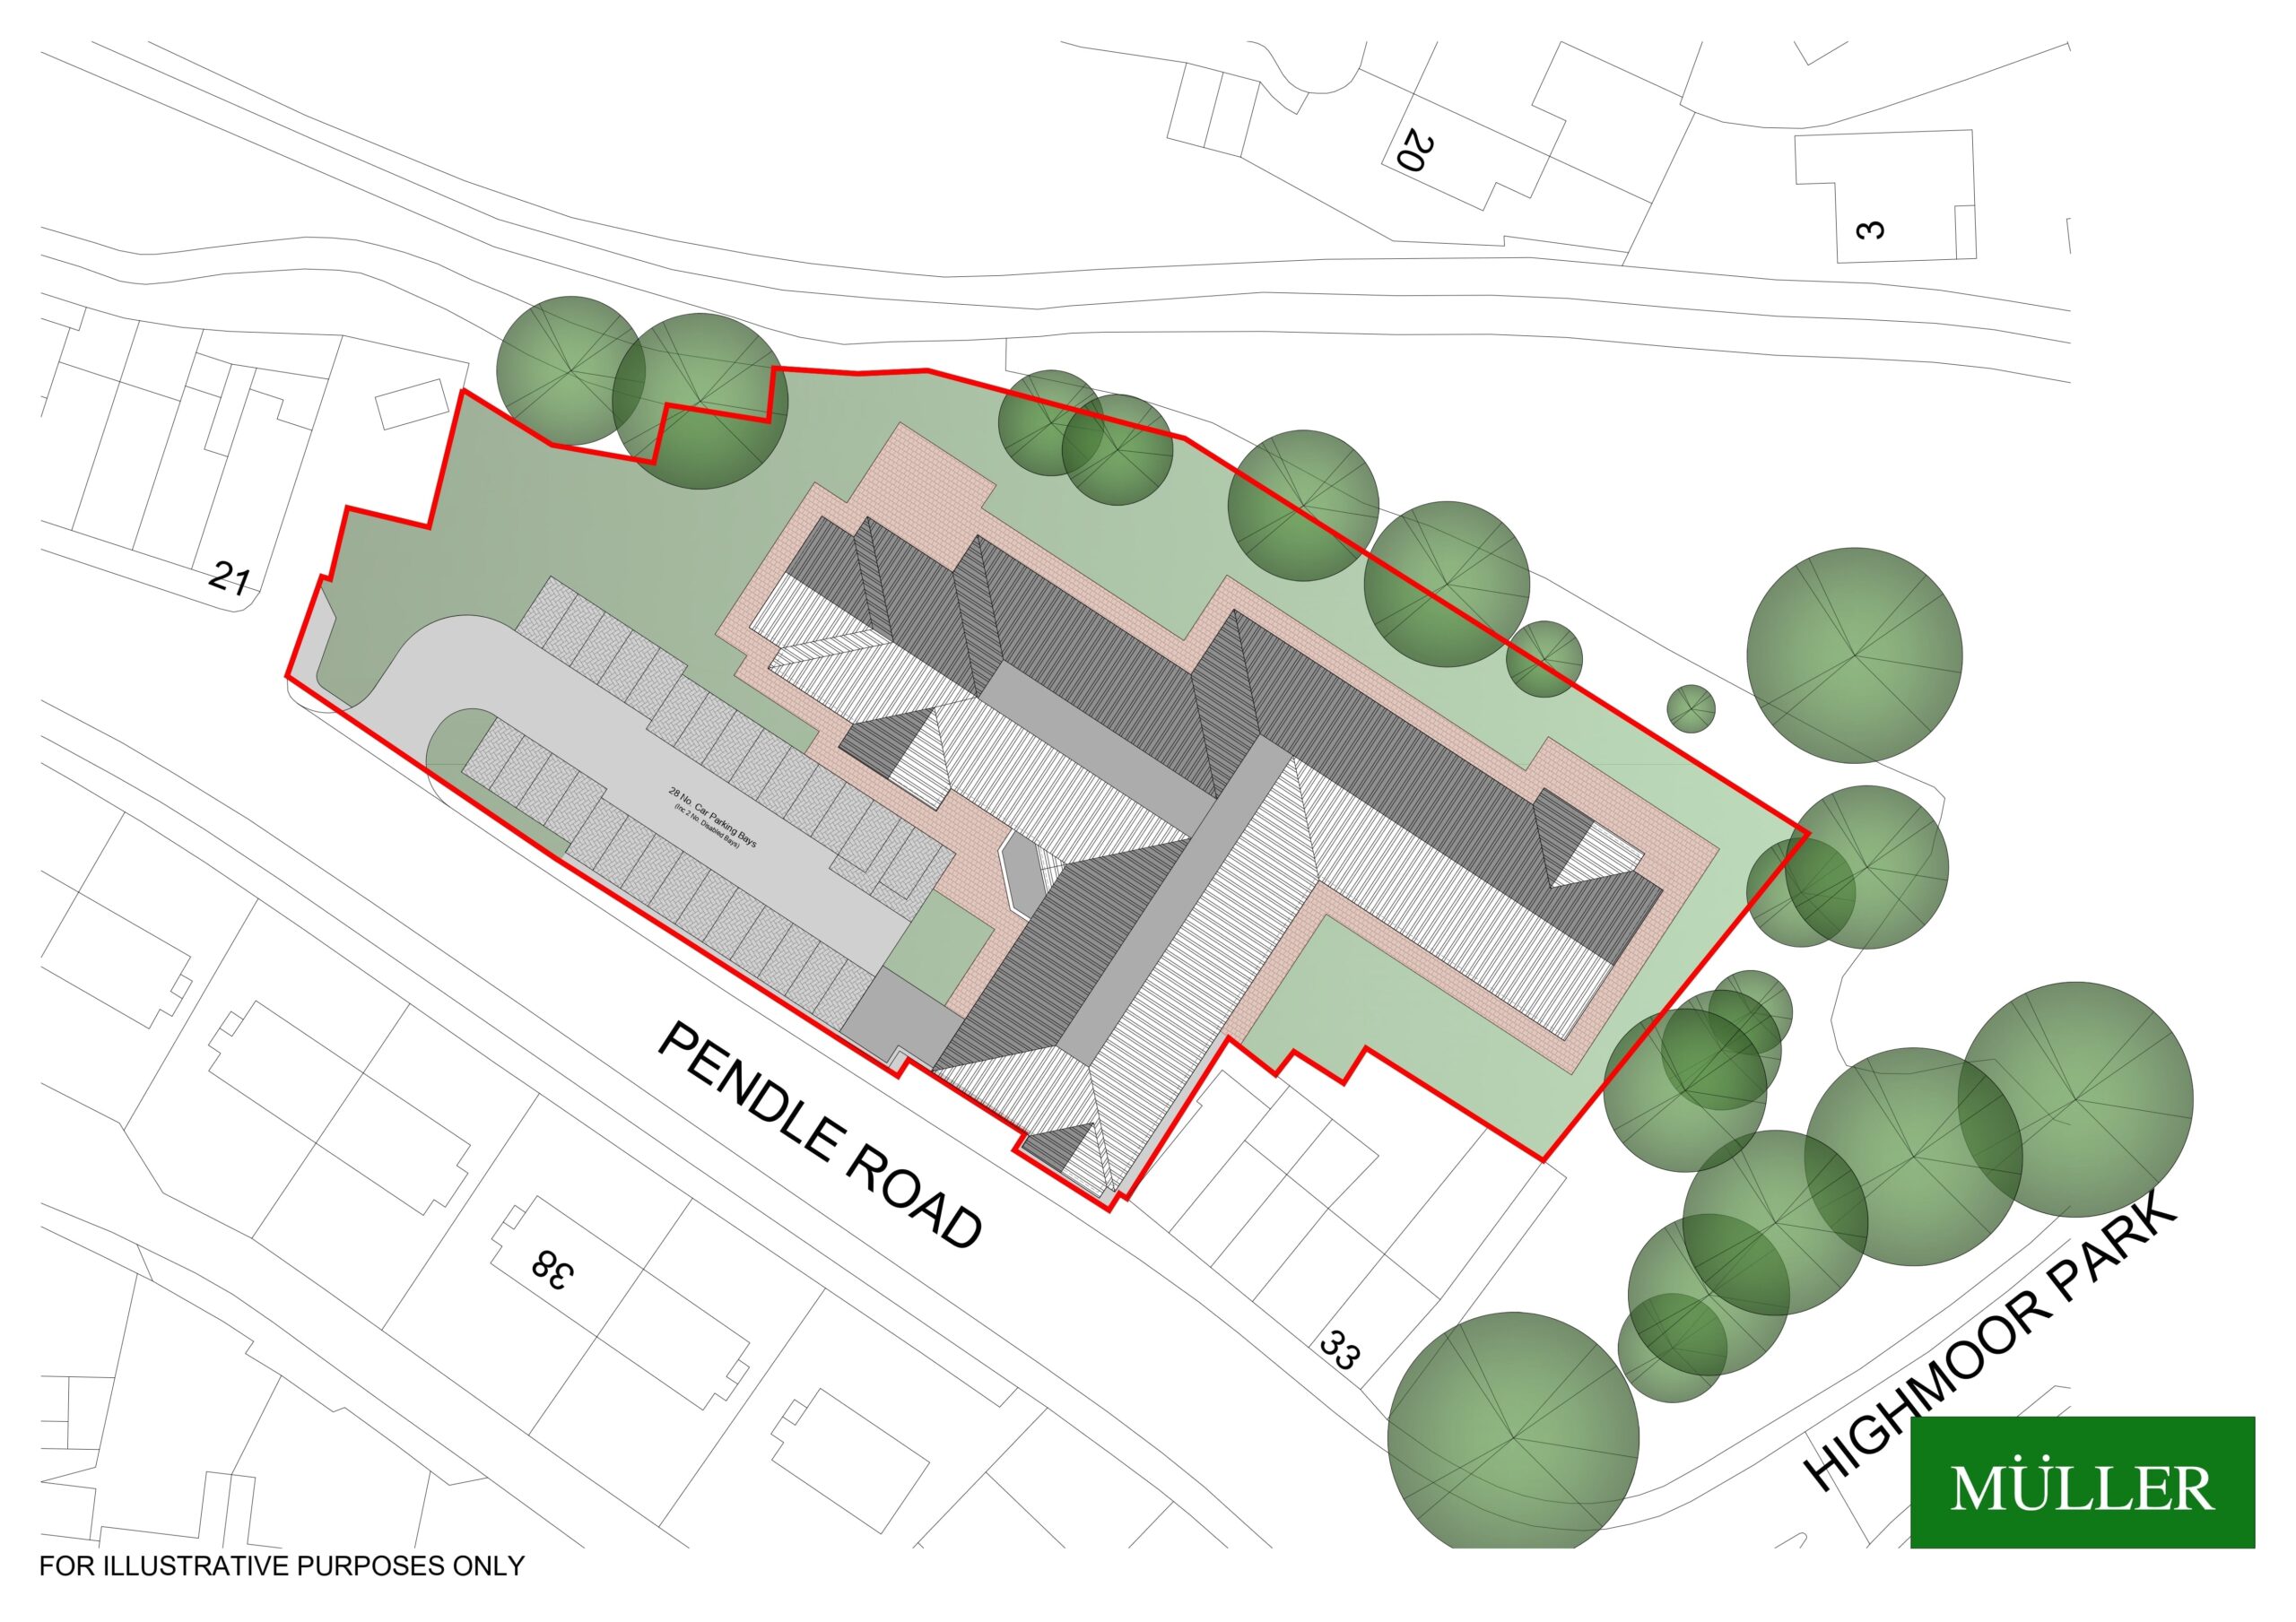 Proposed Site Plan for a residential care home in Clitheroe, Lancashire.